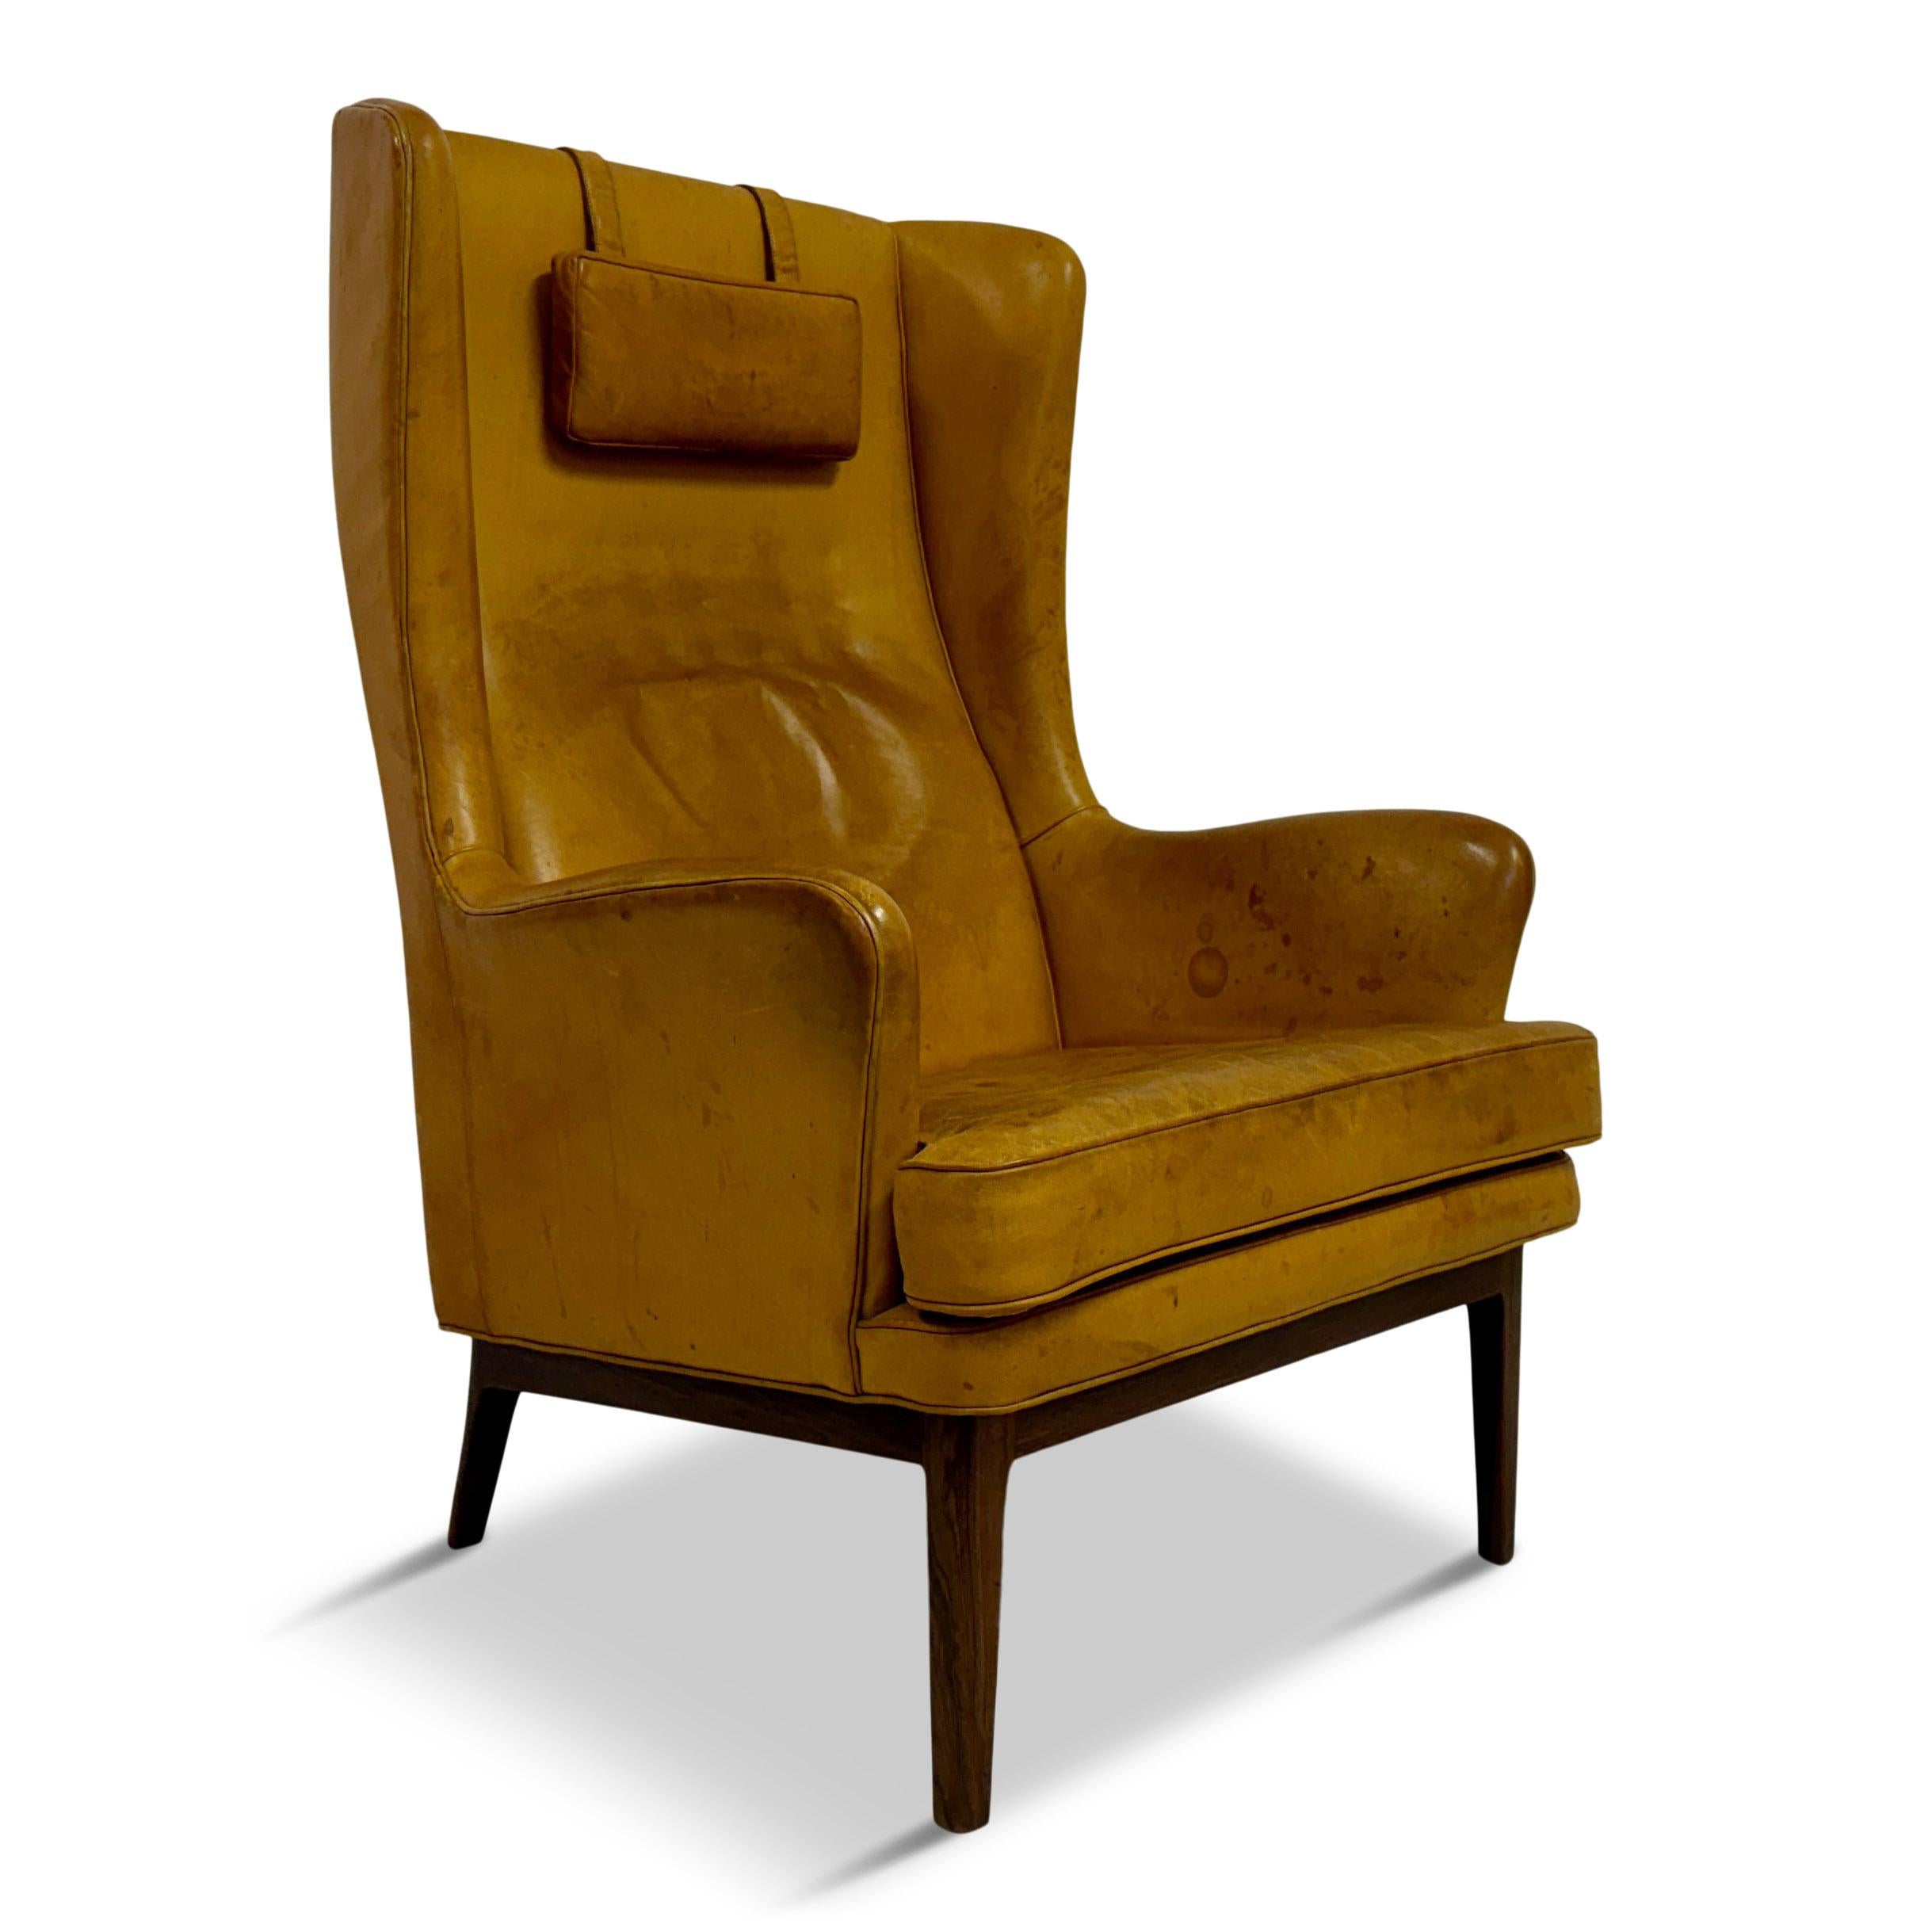 Armchair

Patinated leather

Wingback

Removable weighted head rest

Wood frame

Seat height 42cm

Sweden 1960s